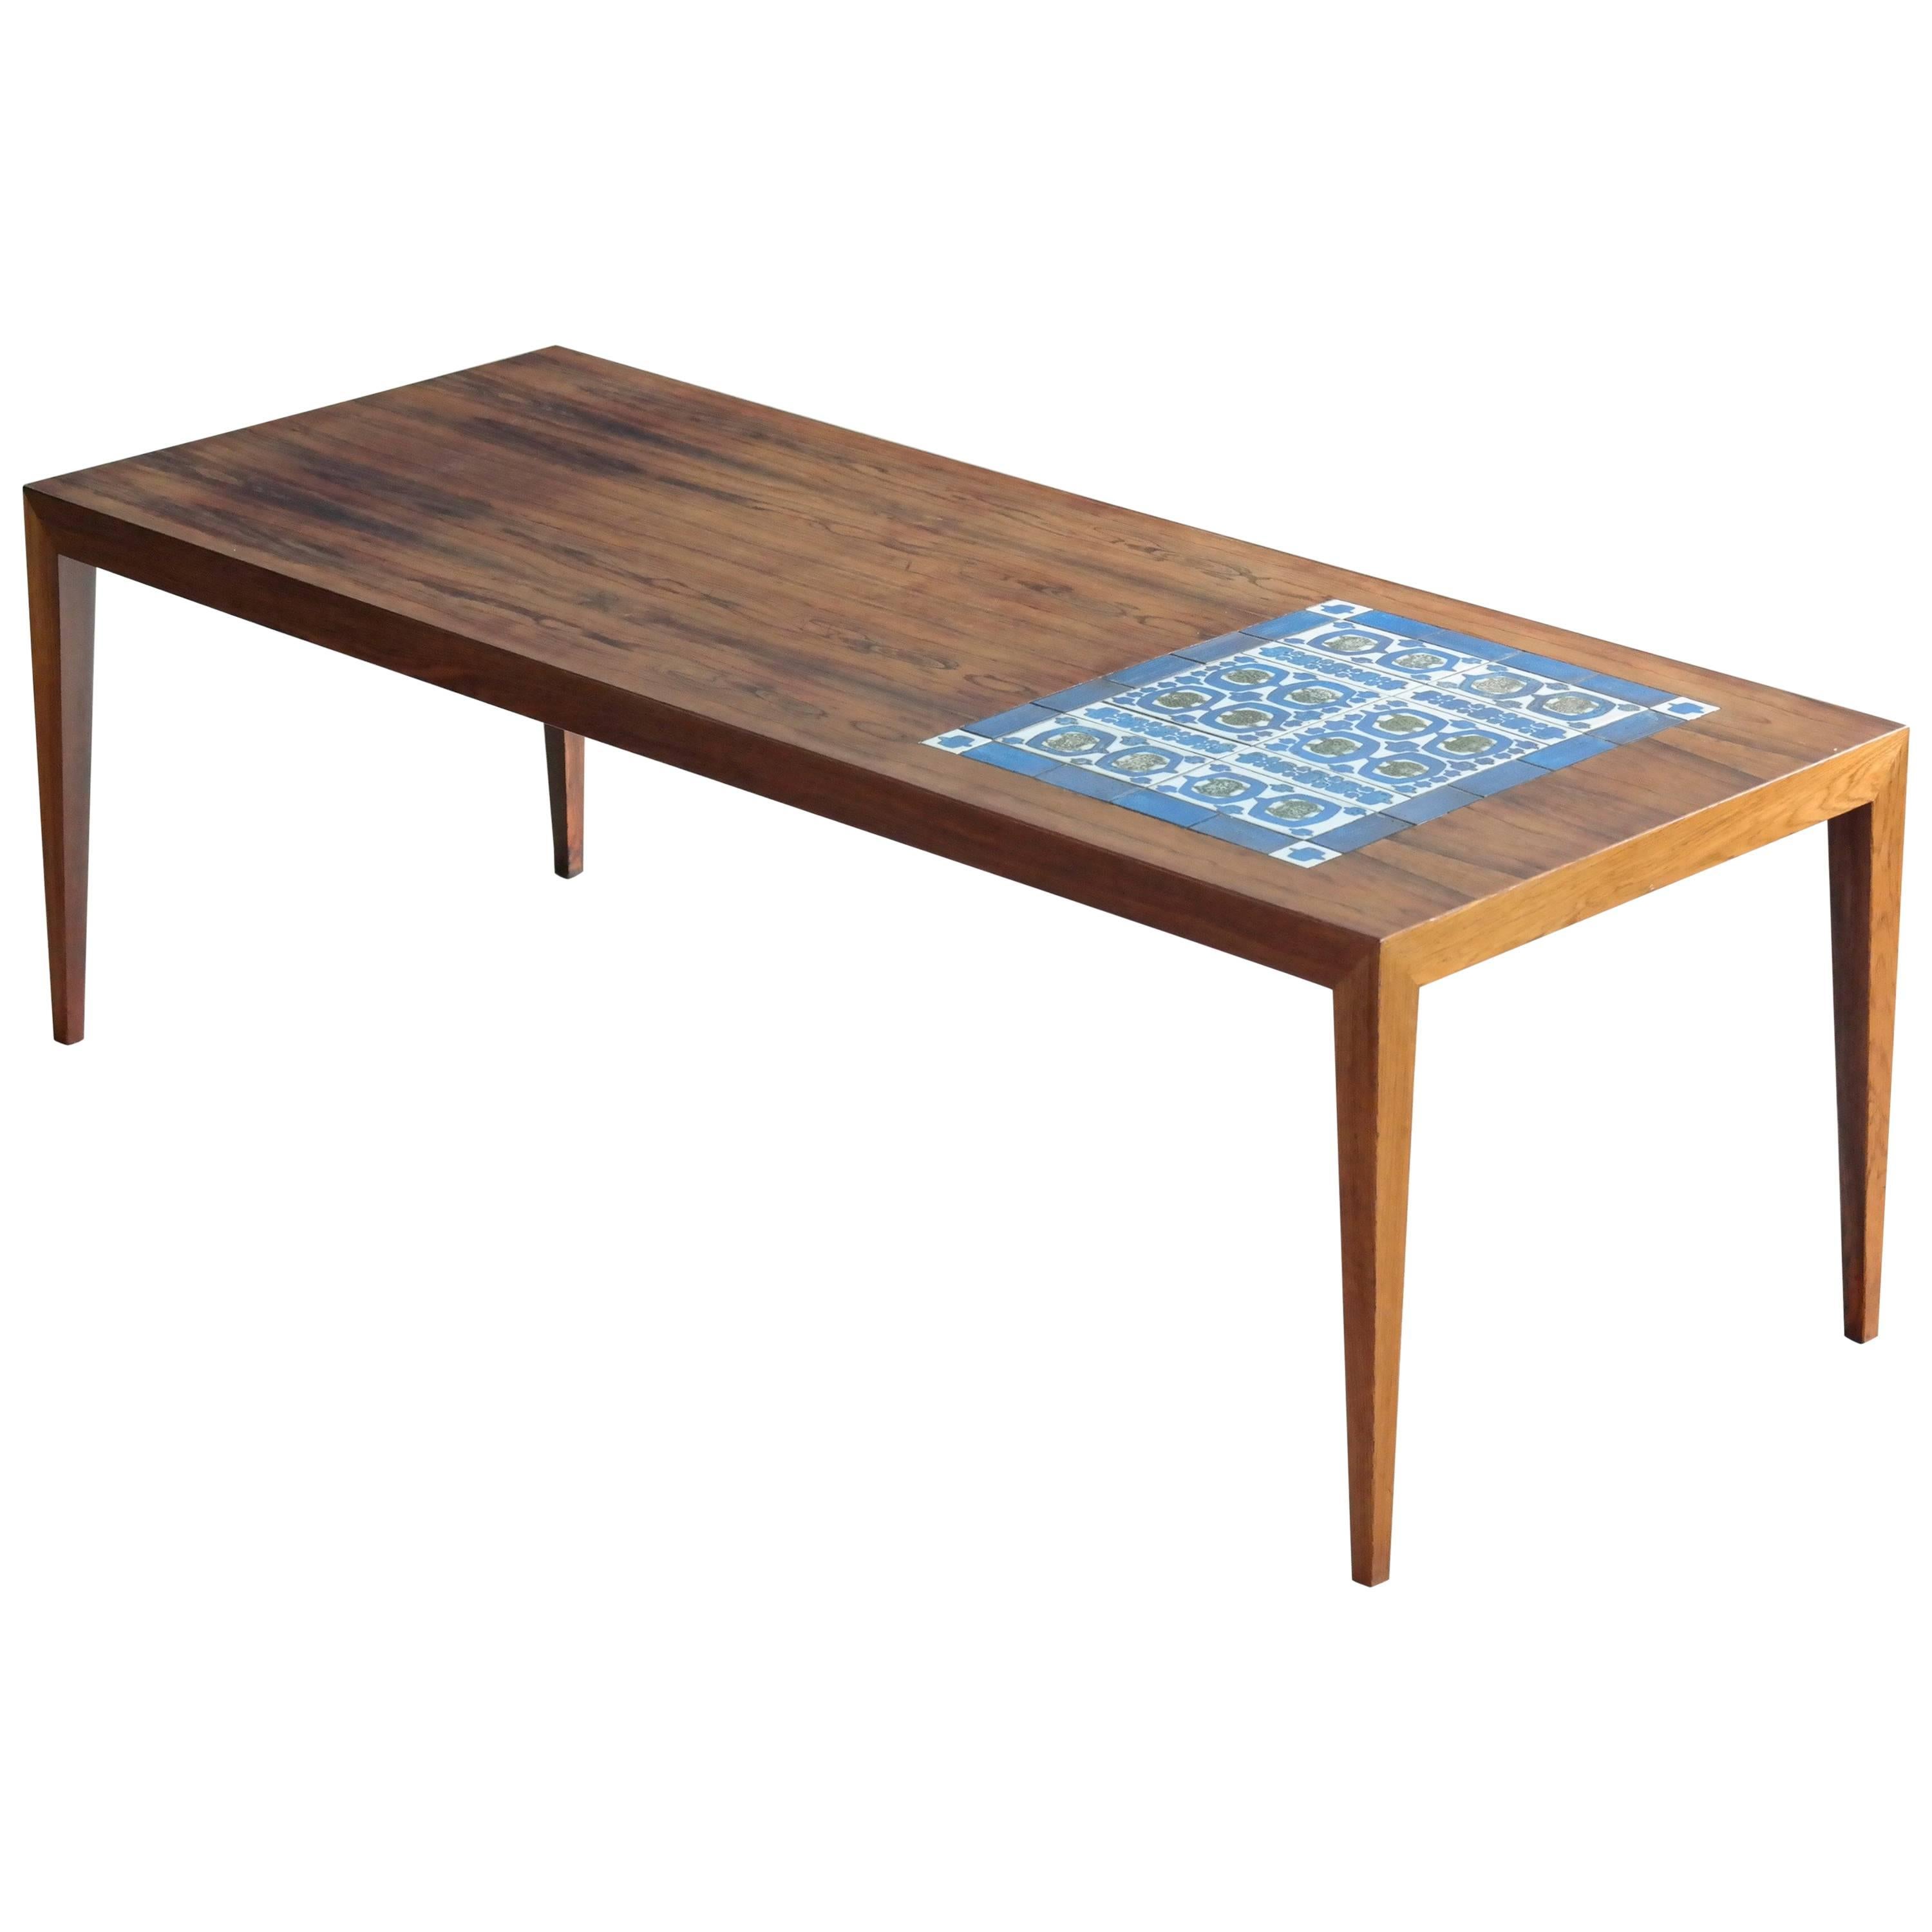 Rosewood Coffee Table, Severin Hansen for Haslev with Tiles by Royal Copenhagen